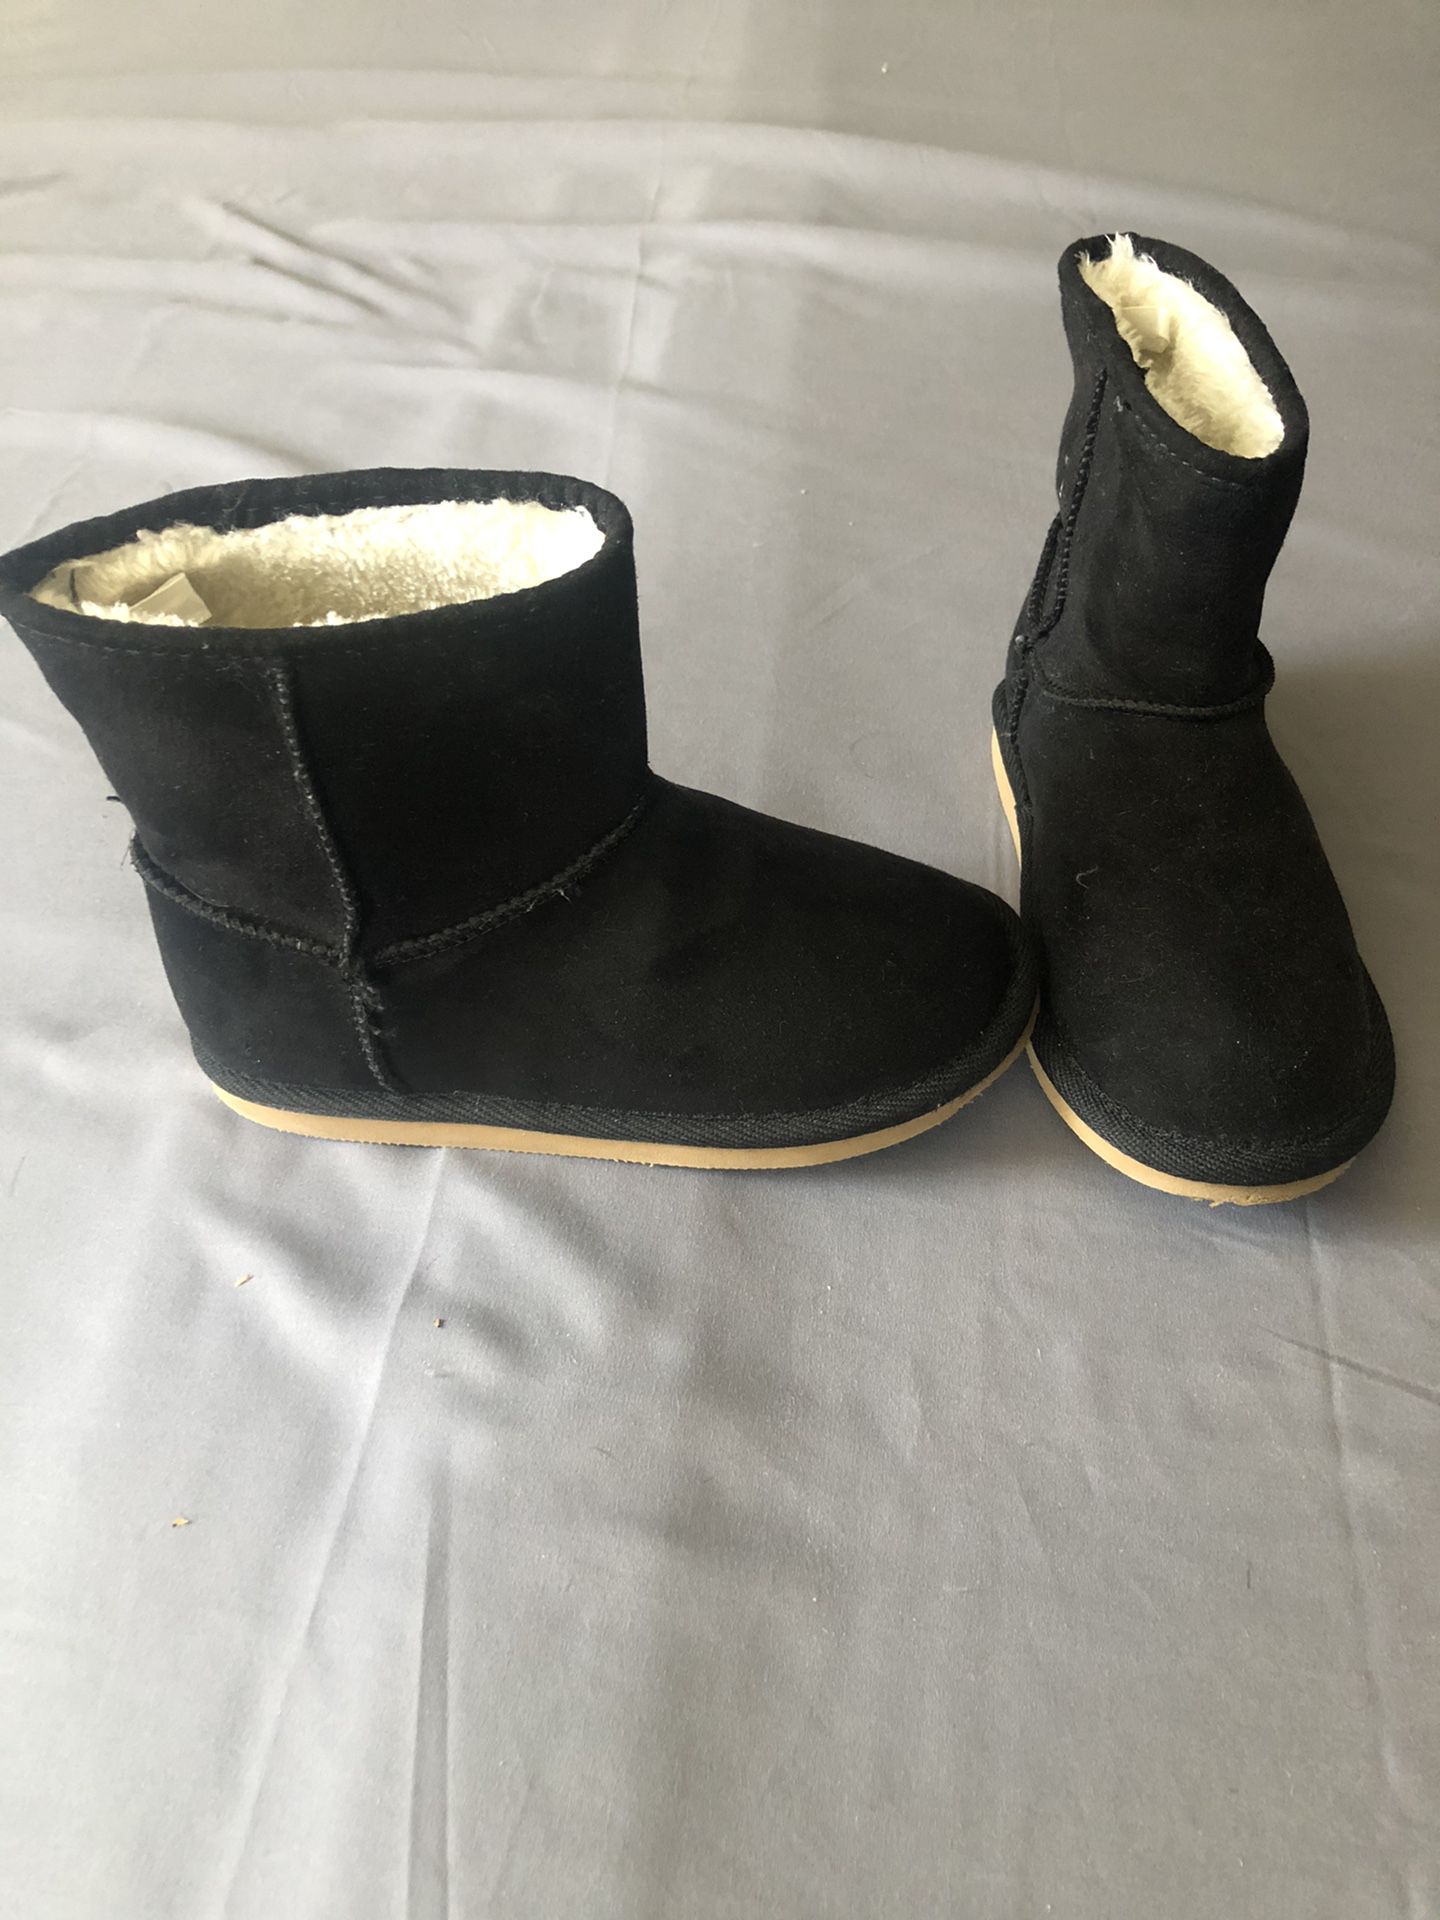 Girls Size 11 Old Navy Boots